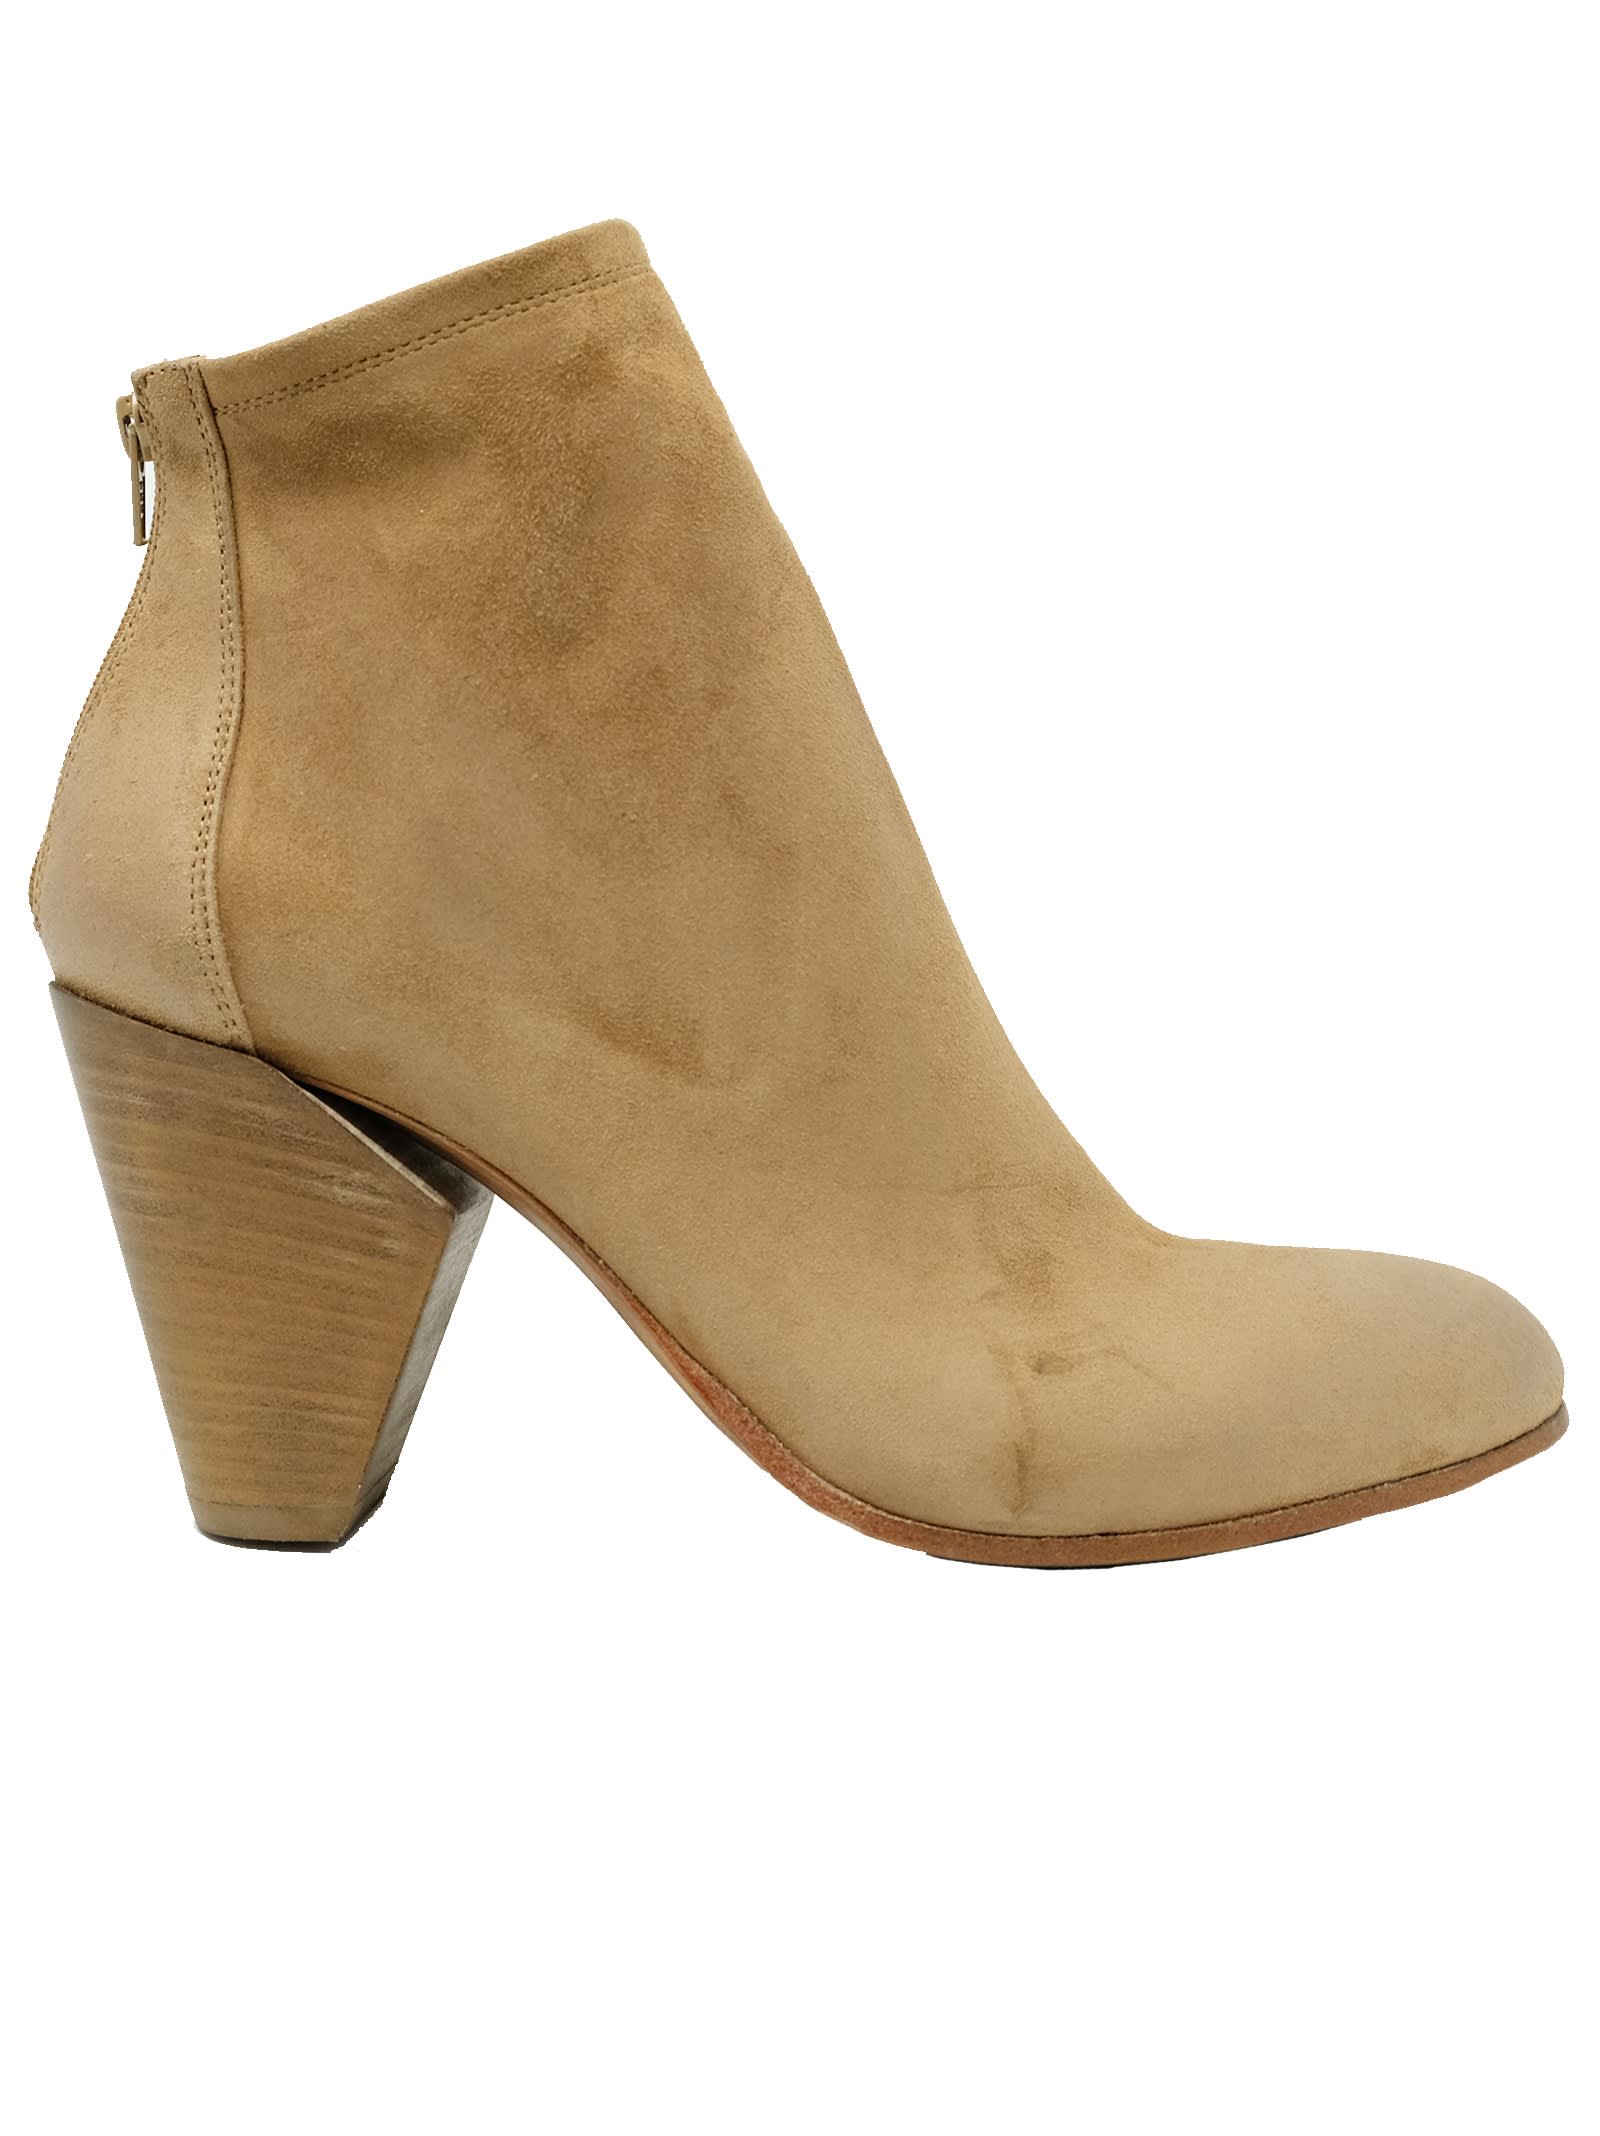 Elena Iachi Biscuit Suede Ankle Boots